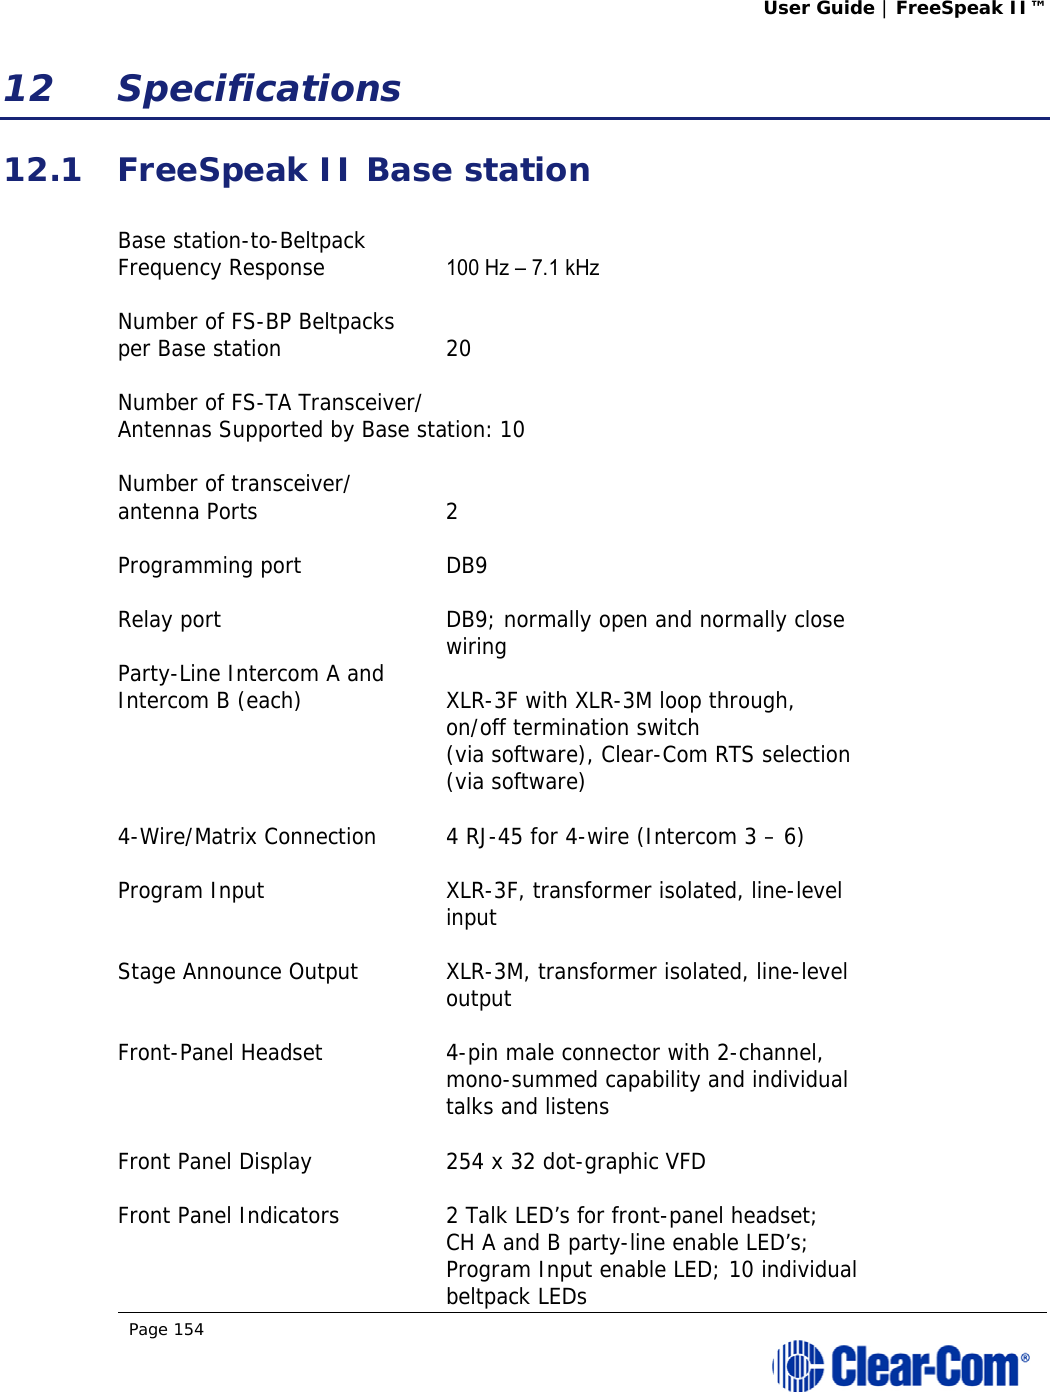 User Guide | FreeSpeak II™  Page 154  12 Specifications 12.1 FreeSpeak II Base station  Base station-to-Beltpack  Frequency Response  100 Hz – 7.1 kHz  Number of FS-BP Beltpacks  per Base station  20  Number of FS-TA Transceiver/ Antennas Supported by Base station: 10  Number of transceiver/ antenna Ports  2  Programming port  DB9  Relay port  DB9; normally open and normally close    wiring Party-Line Intercom A and  Intercom B (each)  XLR-3F with XLR-3M loop through,   on/off termination switch    (via software), Clear-Com RTS selection   (via software)   4-Wire/Matrix Connection  4 RJ-45 for 4-wire (Intercom 3 – 6)  Program Input  XLR-3F, transformer isolated, line-level  input  Stage Announce Output  XLR-3M, transformer isolated, line-level   output  Front-Panel Headset  4-pin male connector with 2-channel,    mono-summed capability and individual   talks and listens  Front Panel Display  254 x 32 dot-graphic VFD  Front Panel Indicators  2 Talk LED’s for front-panel headset;    CH A and B party-line enable LED’s;    Program Input enable LED; 10 individual   beltpack LEDs 